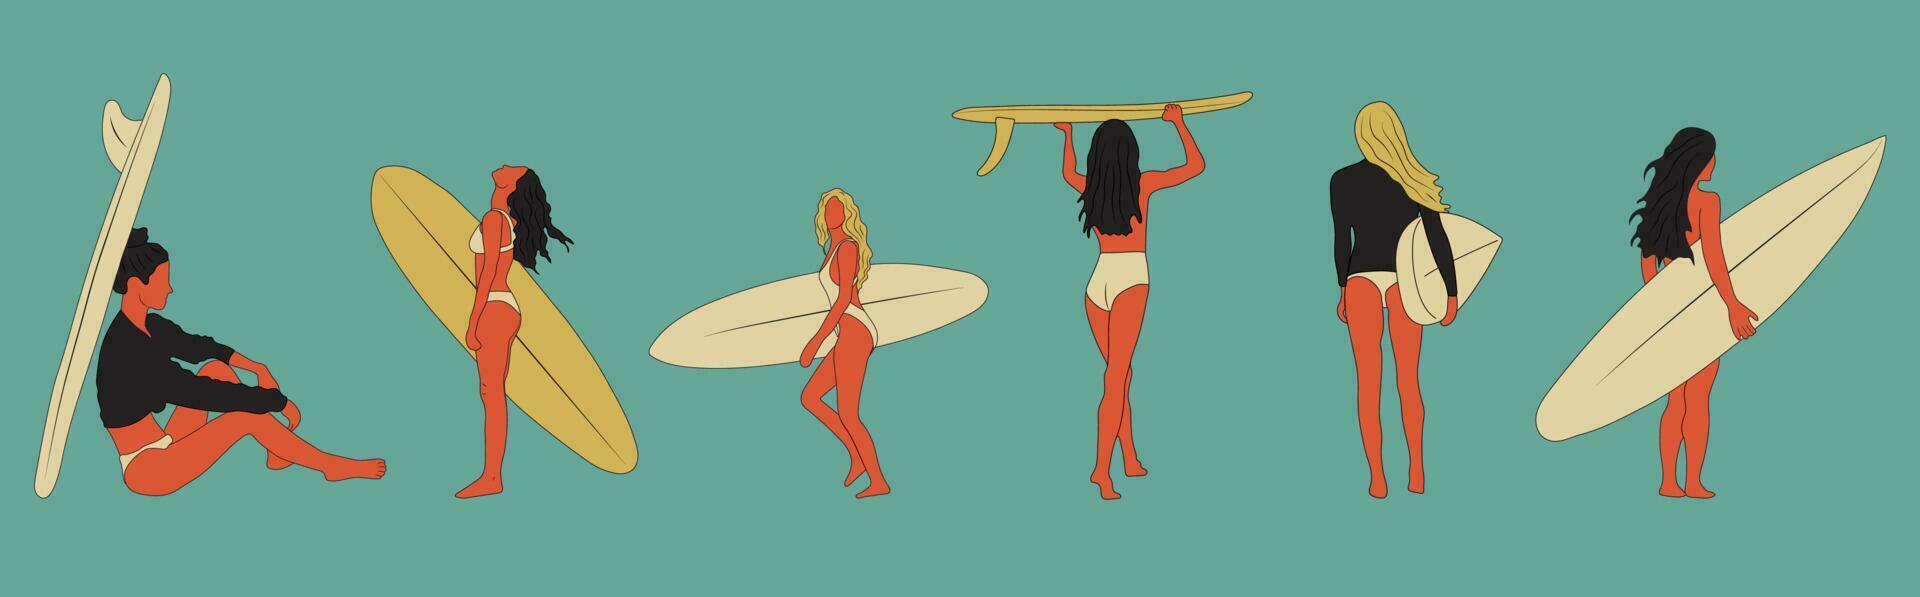 Set of Surf girls minimalist vector illustration. Flat style digital art. Young woman with surfboard in full growth